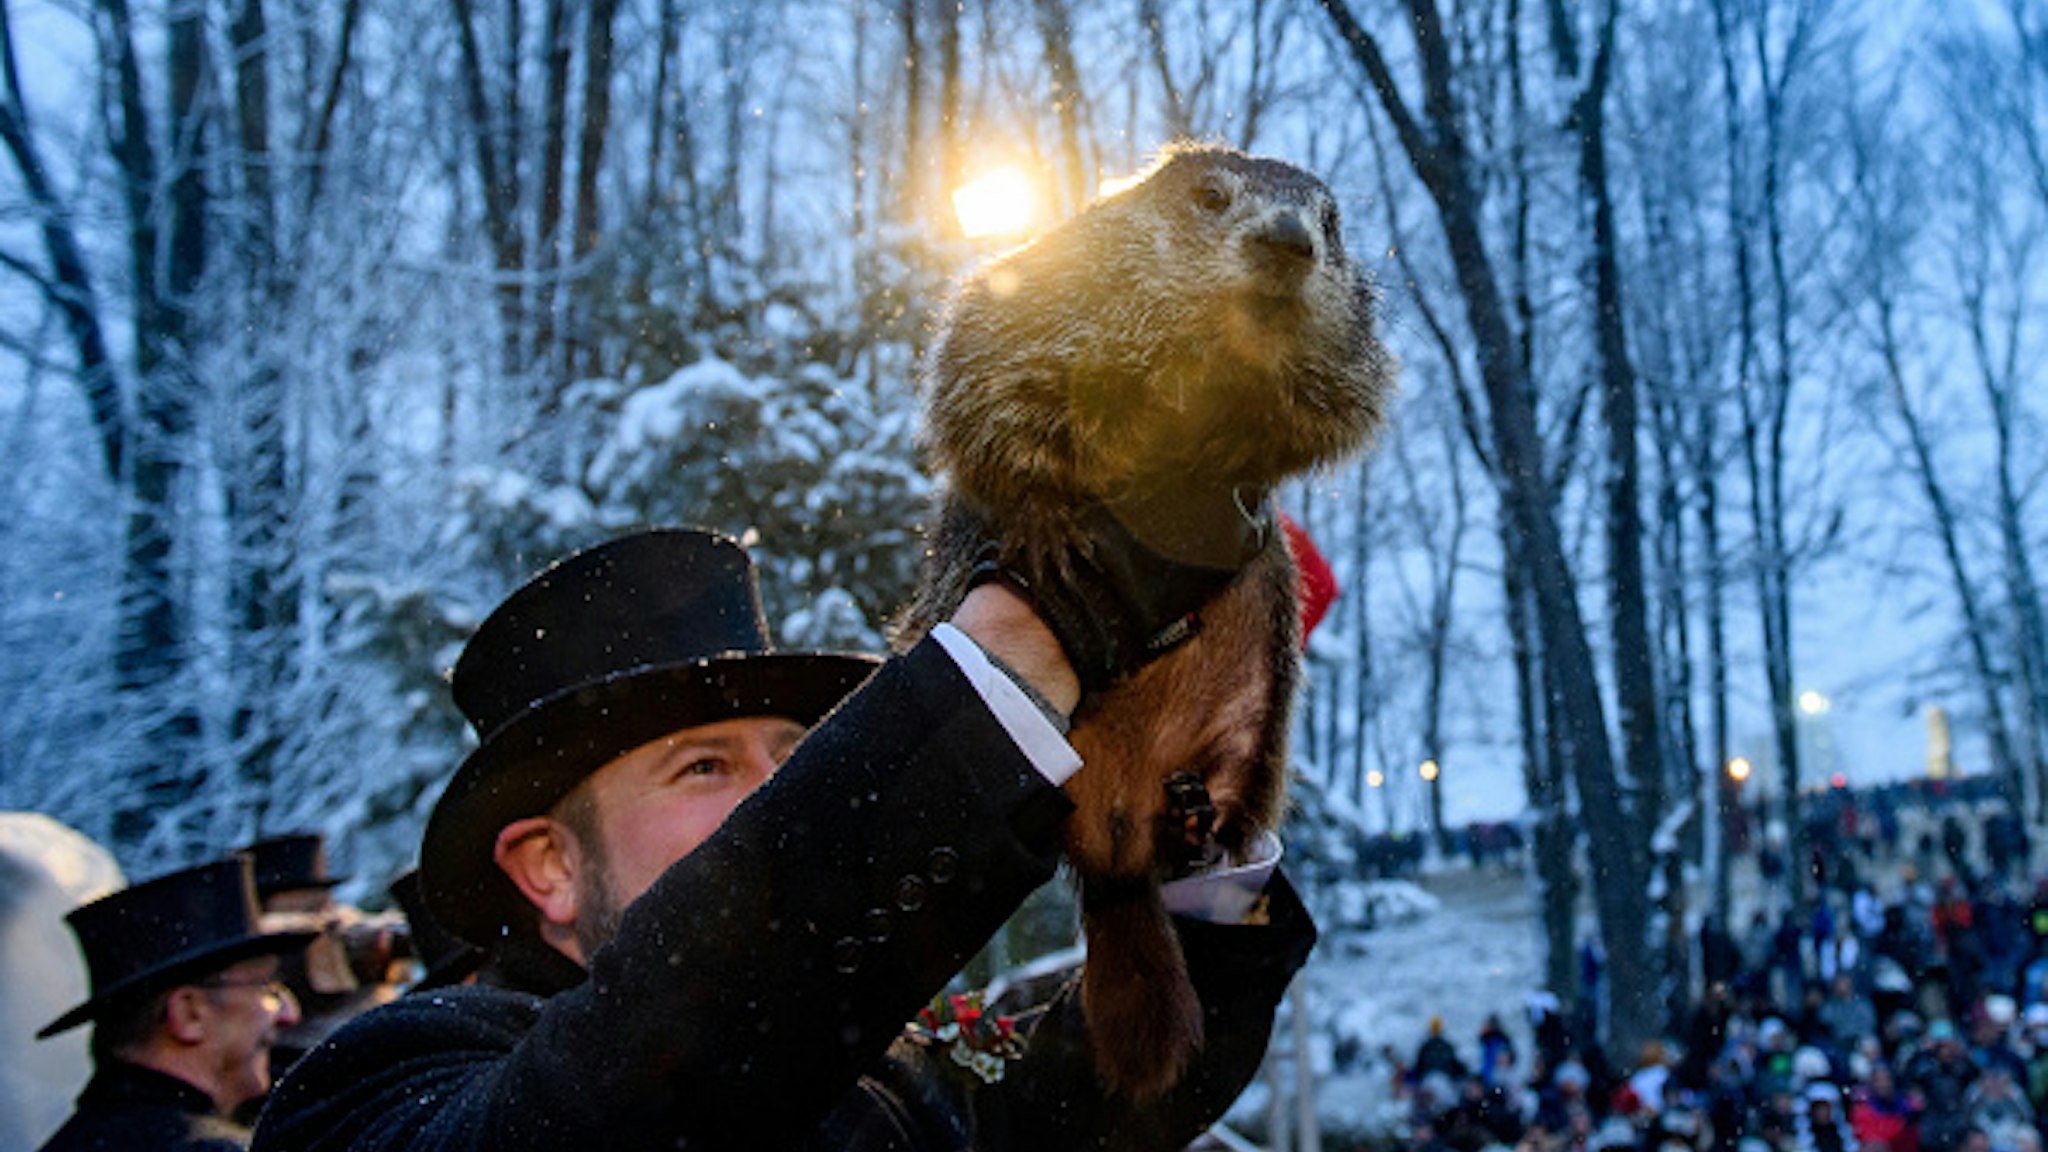 PUNXSUTAWNEY, PA - FEBRUARY 02: Groundhog handler AJ Dereume holds Punxsutawney Phil, who did not see his shadow, predicting an early or late spring during the 134th annual Groundhog Day festivities on February 2, 2020 in Punxsutawney, Pennsylvania. Groundhog Day is a popular tradition in the United States and Canada. A crowd of upwards of 20,000 people spent a night of revelry awaiting the sunrise and the groundhog's exit from his winter den. If Punxsutawney Phil sees his shadow he regards it as an omen of six more weeks of bad weather and returns to his den. Early spring arrives if he does not see his shadow, causing Phil to remain above ground.